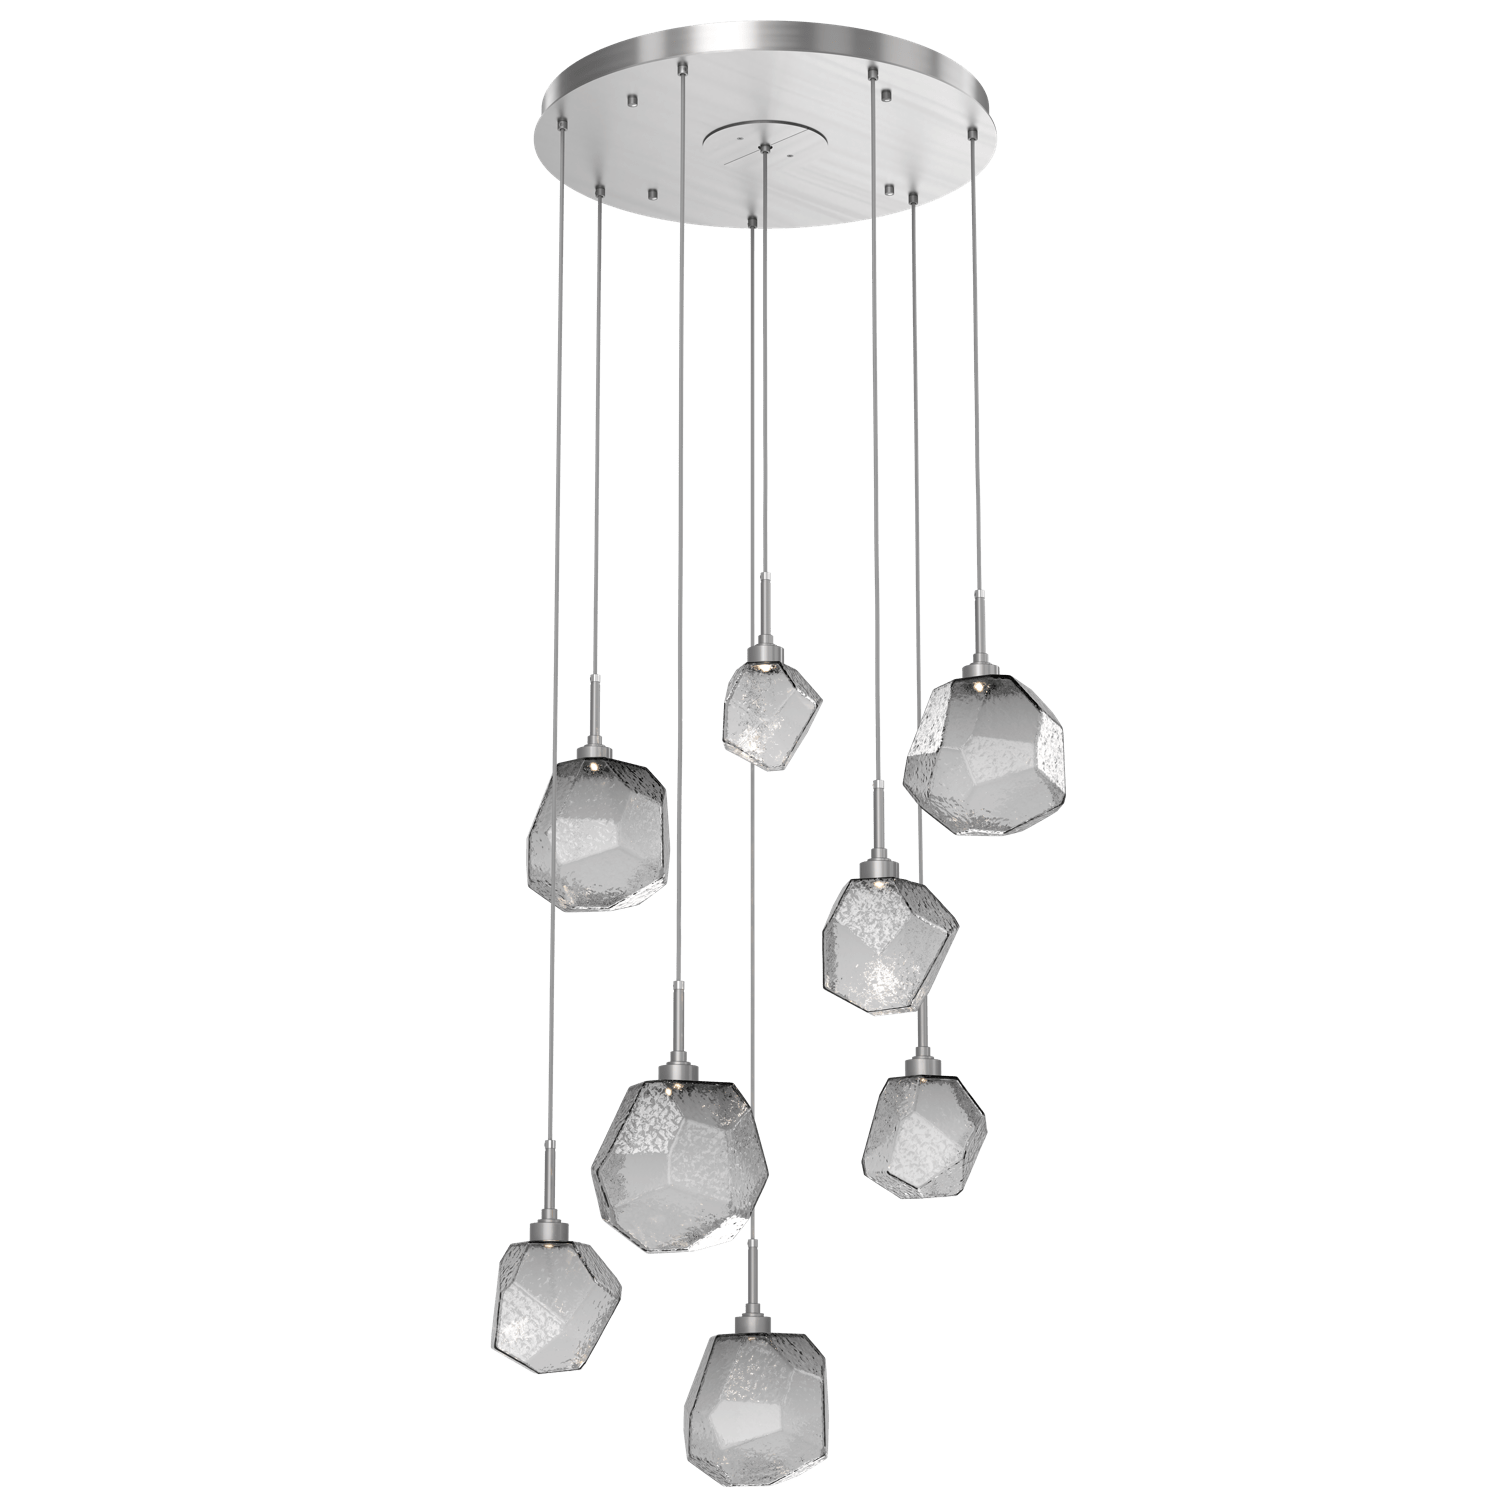 CHB0039-08-SN-S-Hammerton-Studio-Gem-8-light-round-pendant-chandelier-with-satin-nickel-finish-and-smoke-blown-glass-shades-and-LED-lamping